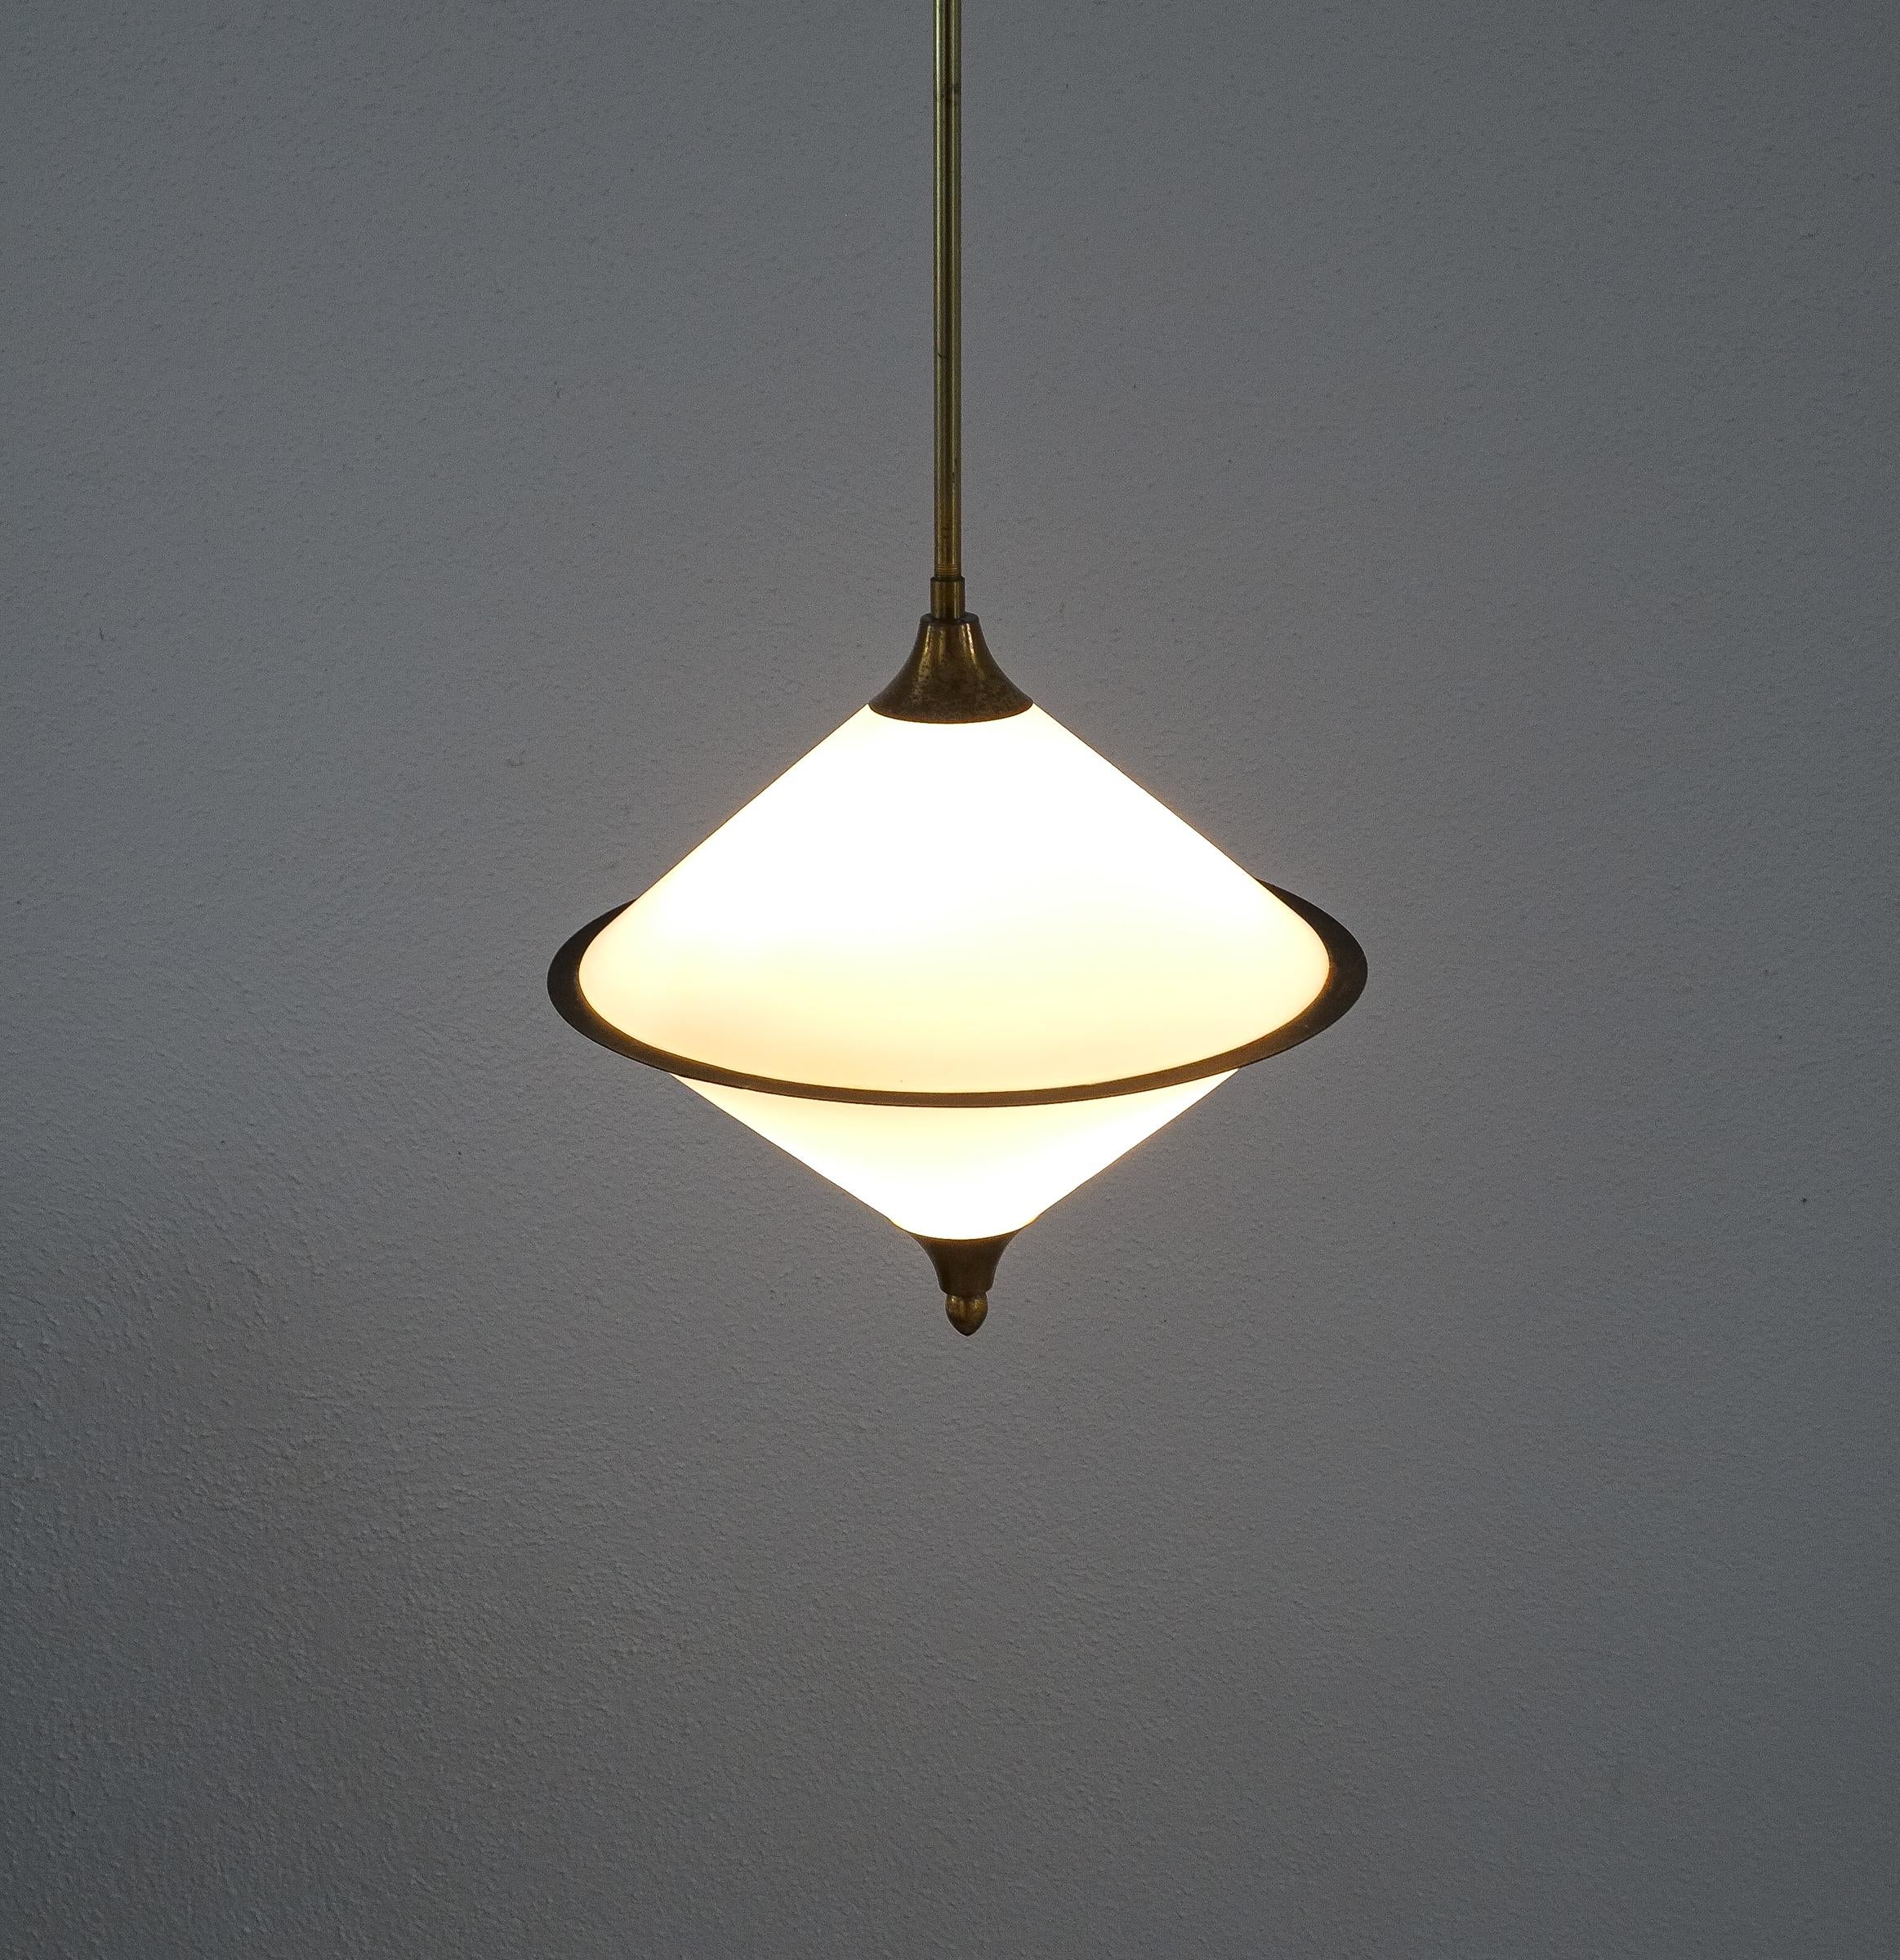 Italian Rare Spin Top Shaped Pendant Lamp Opal Glass Attributed to Lelli, circa 1950 For Sale